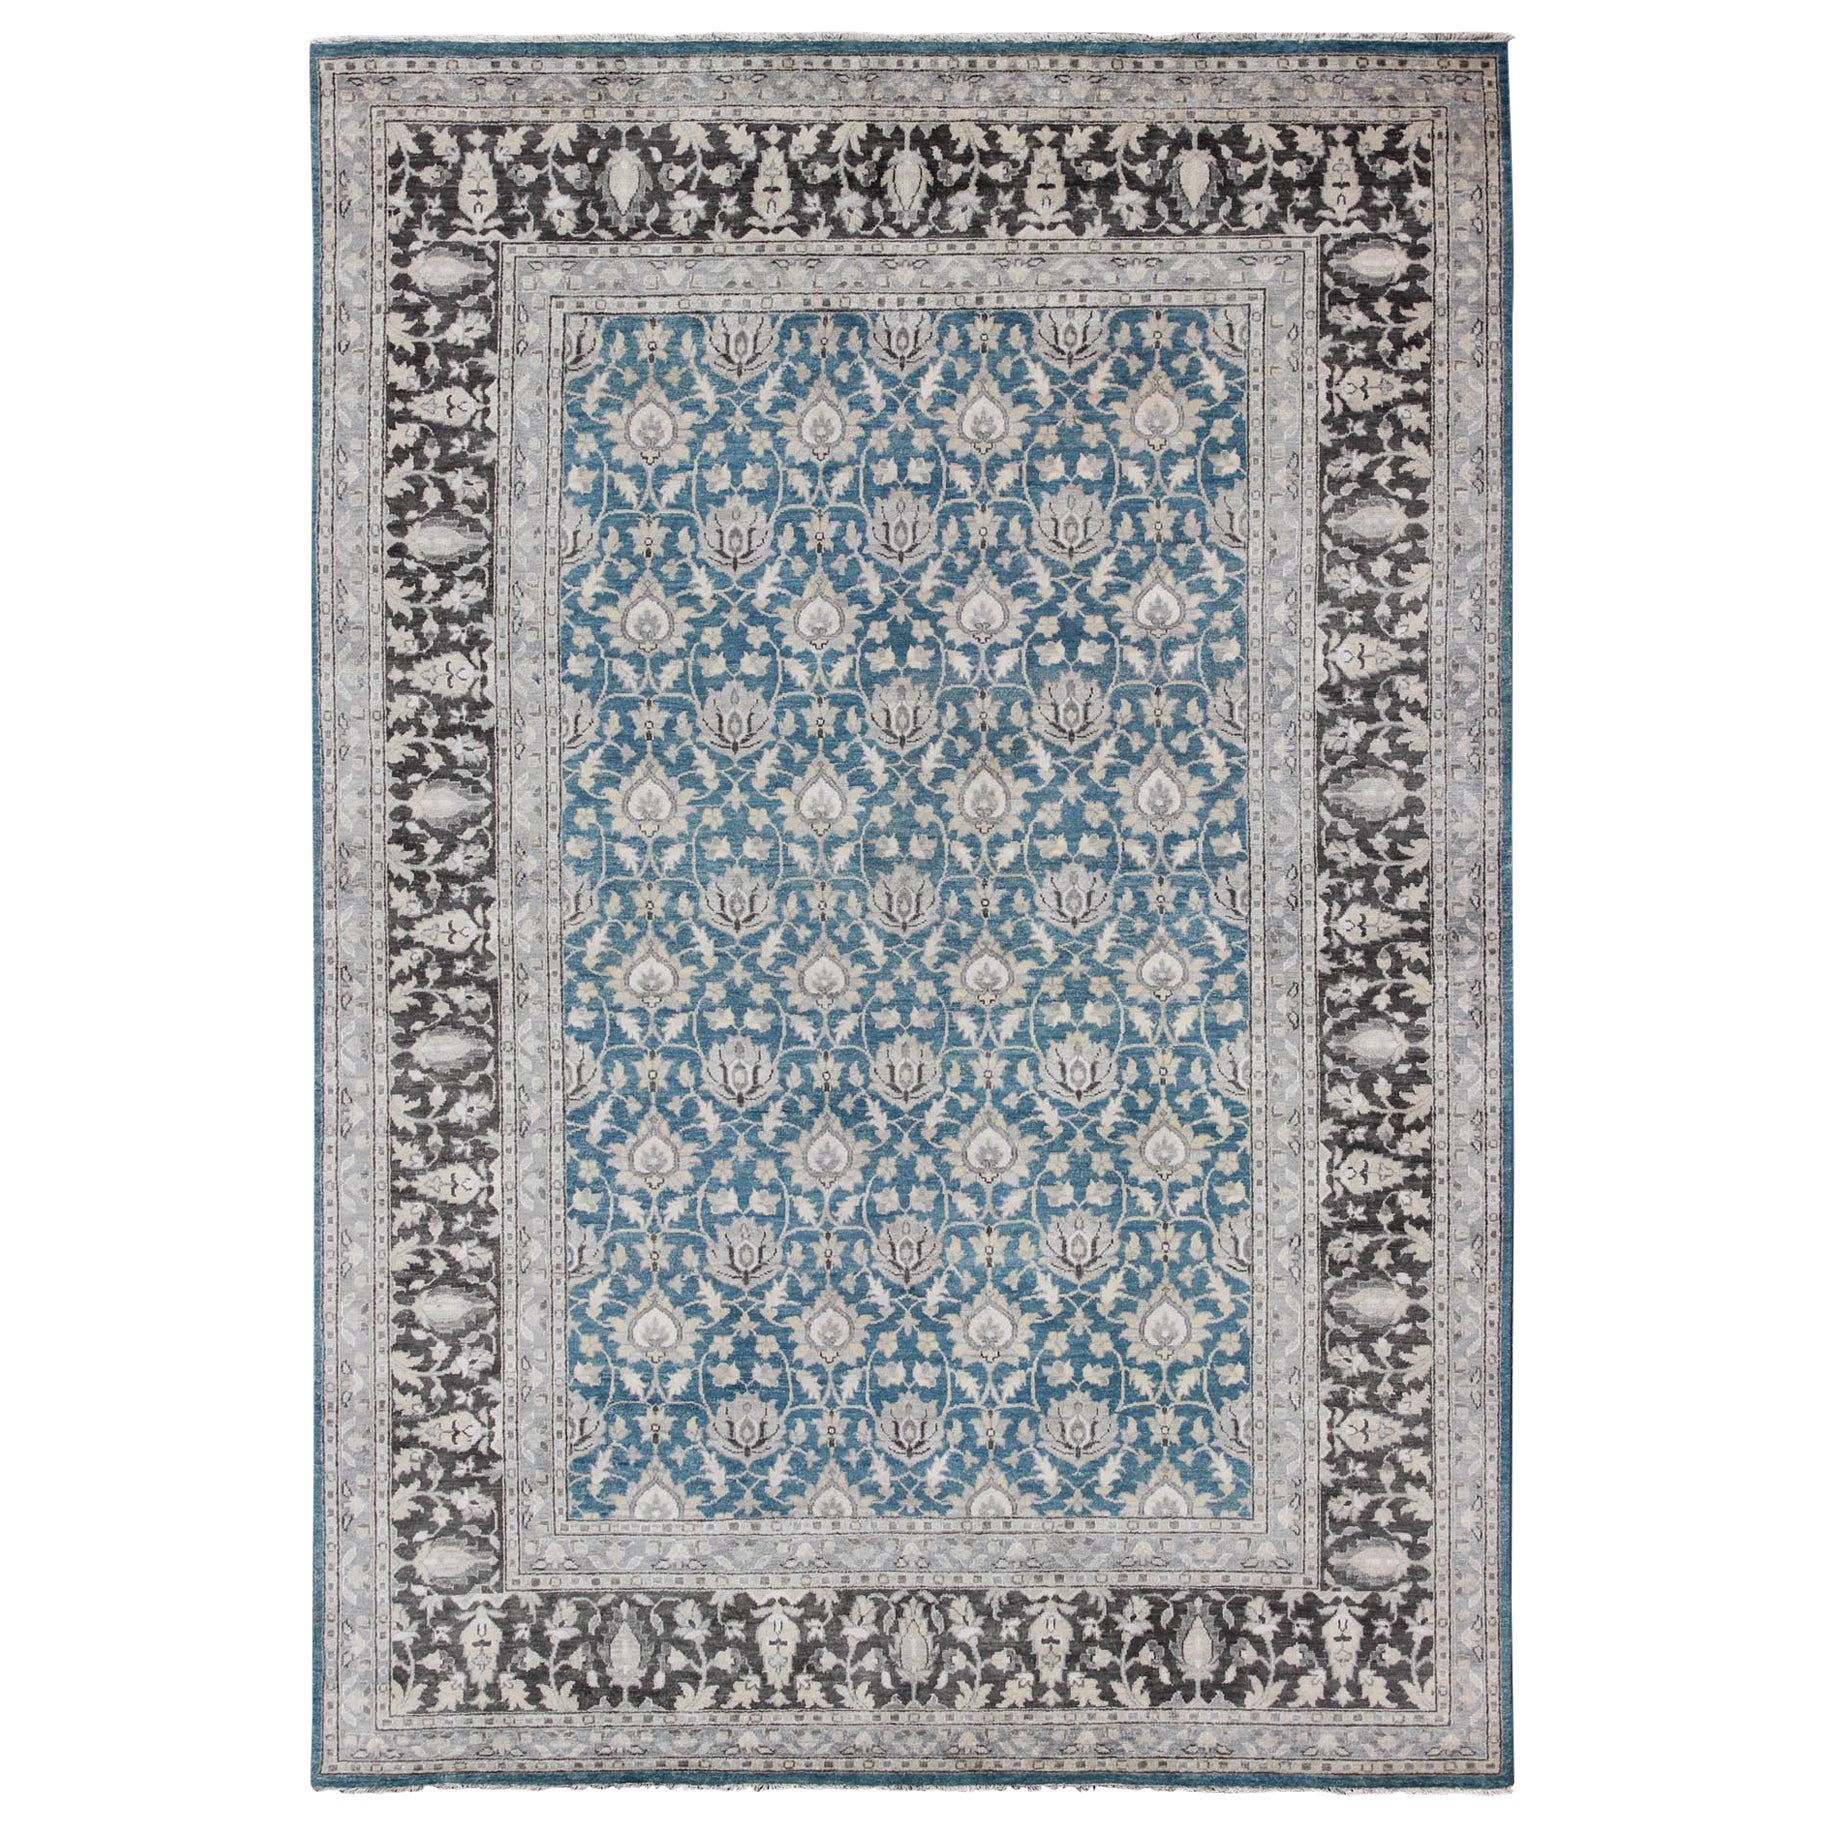 Keivan Woven Arts Large Tabriz Design Rug in Blue, Gray and Charcoal